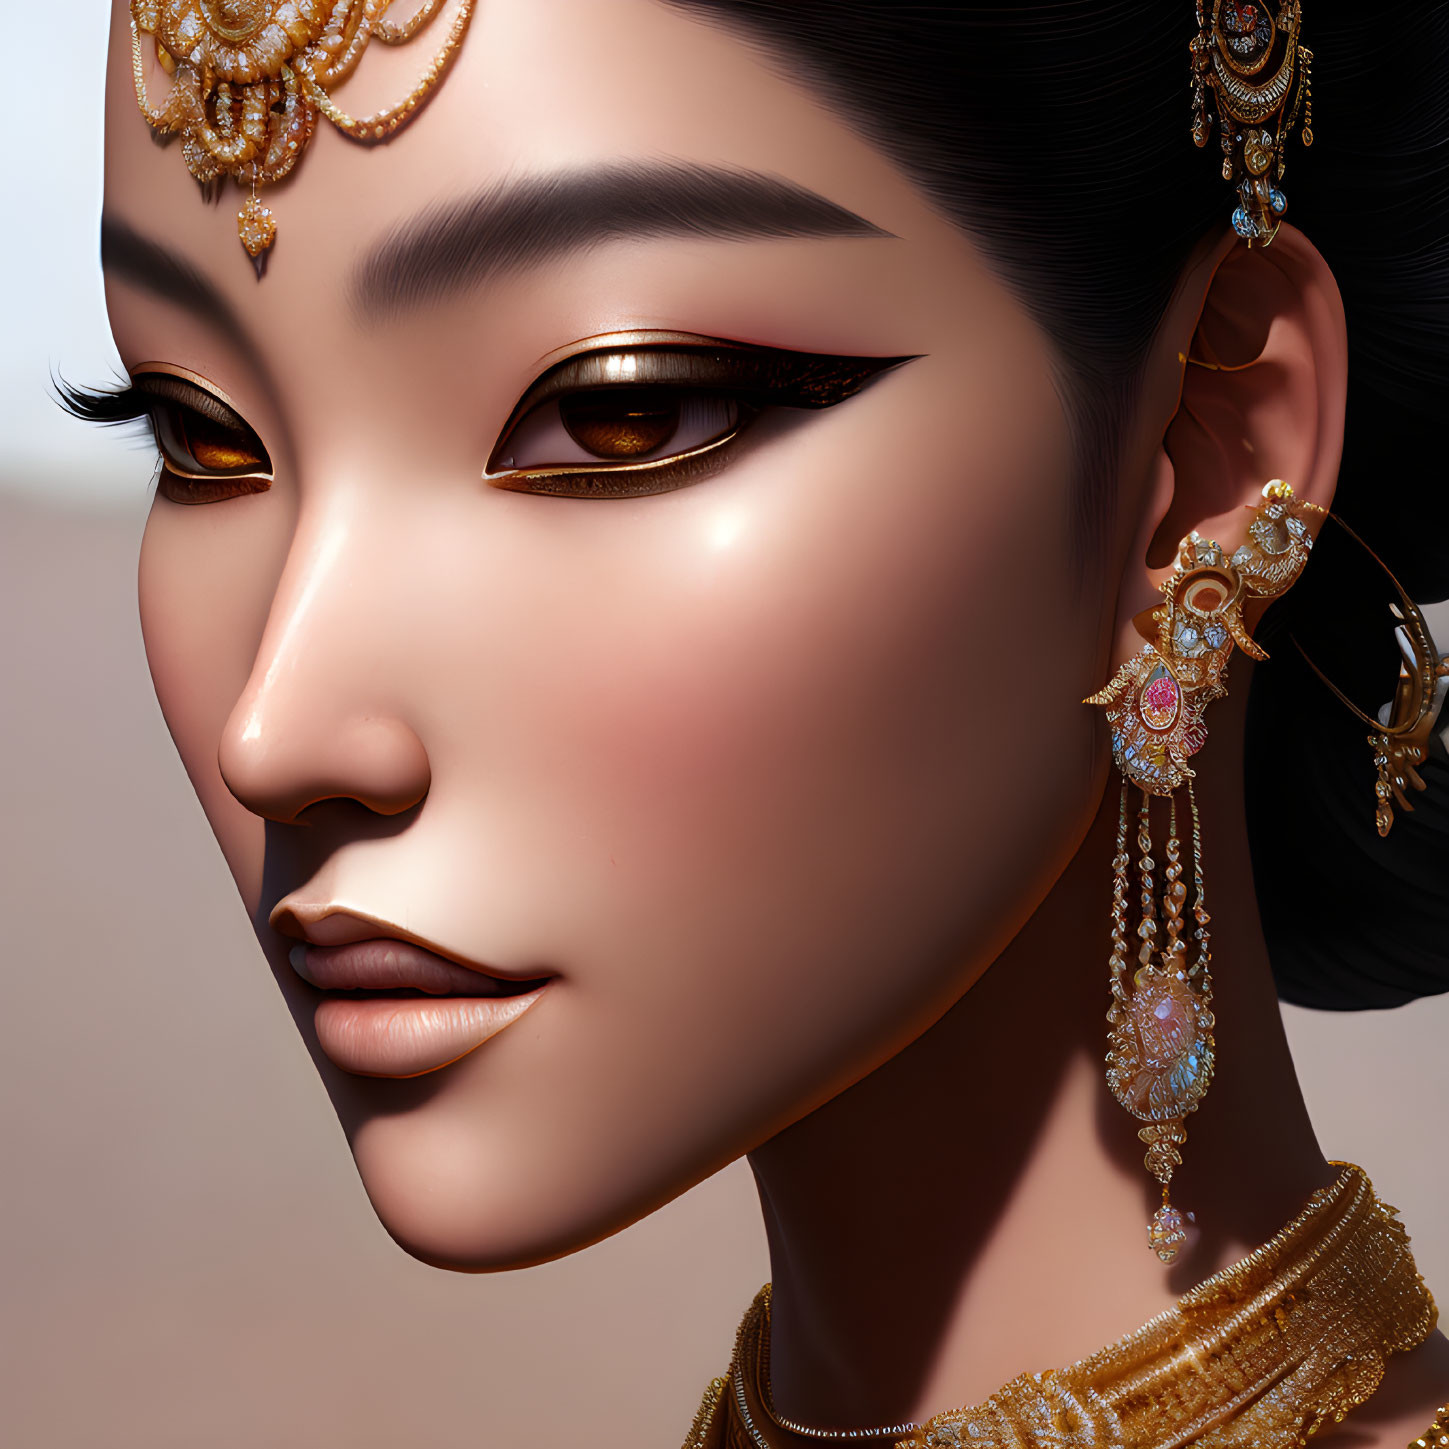 Detailed Close-Up of 3D-Rendered Woman in Gold Jewelry